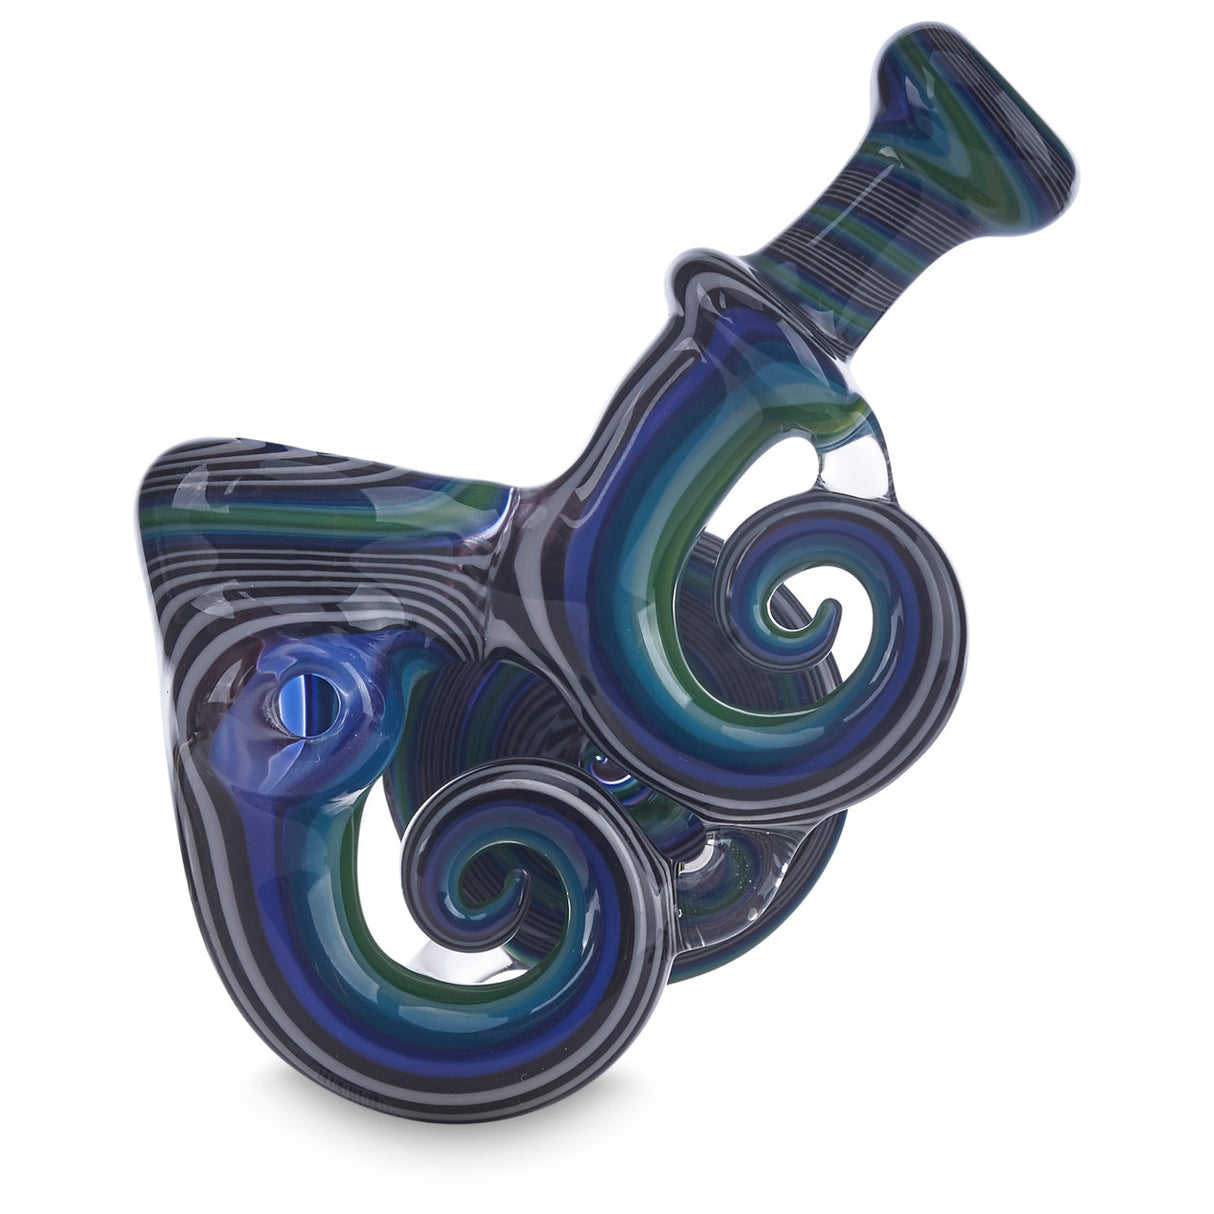 andy g worked sherlock for sale at cloud 9 smoke co